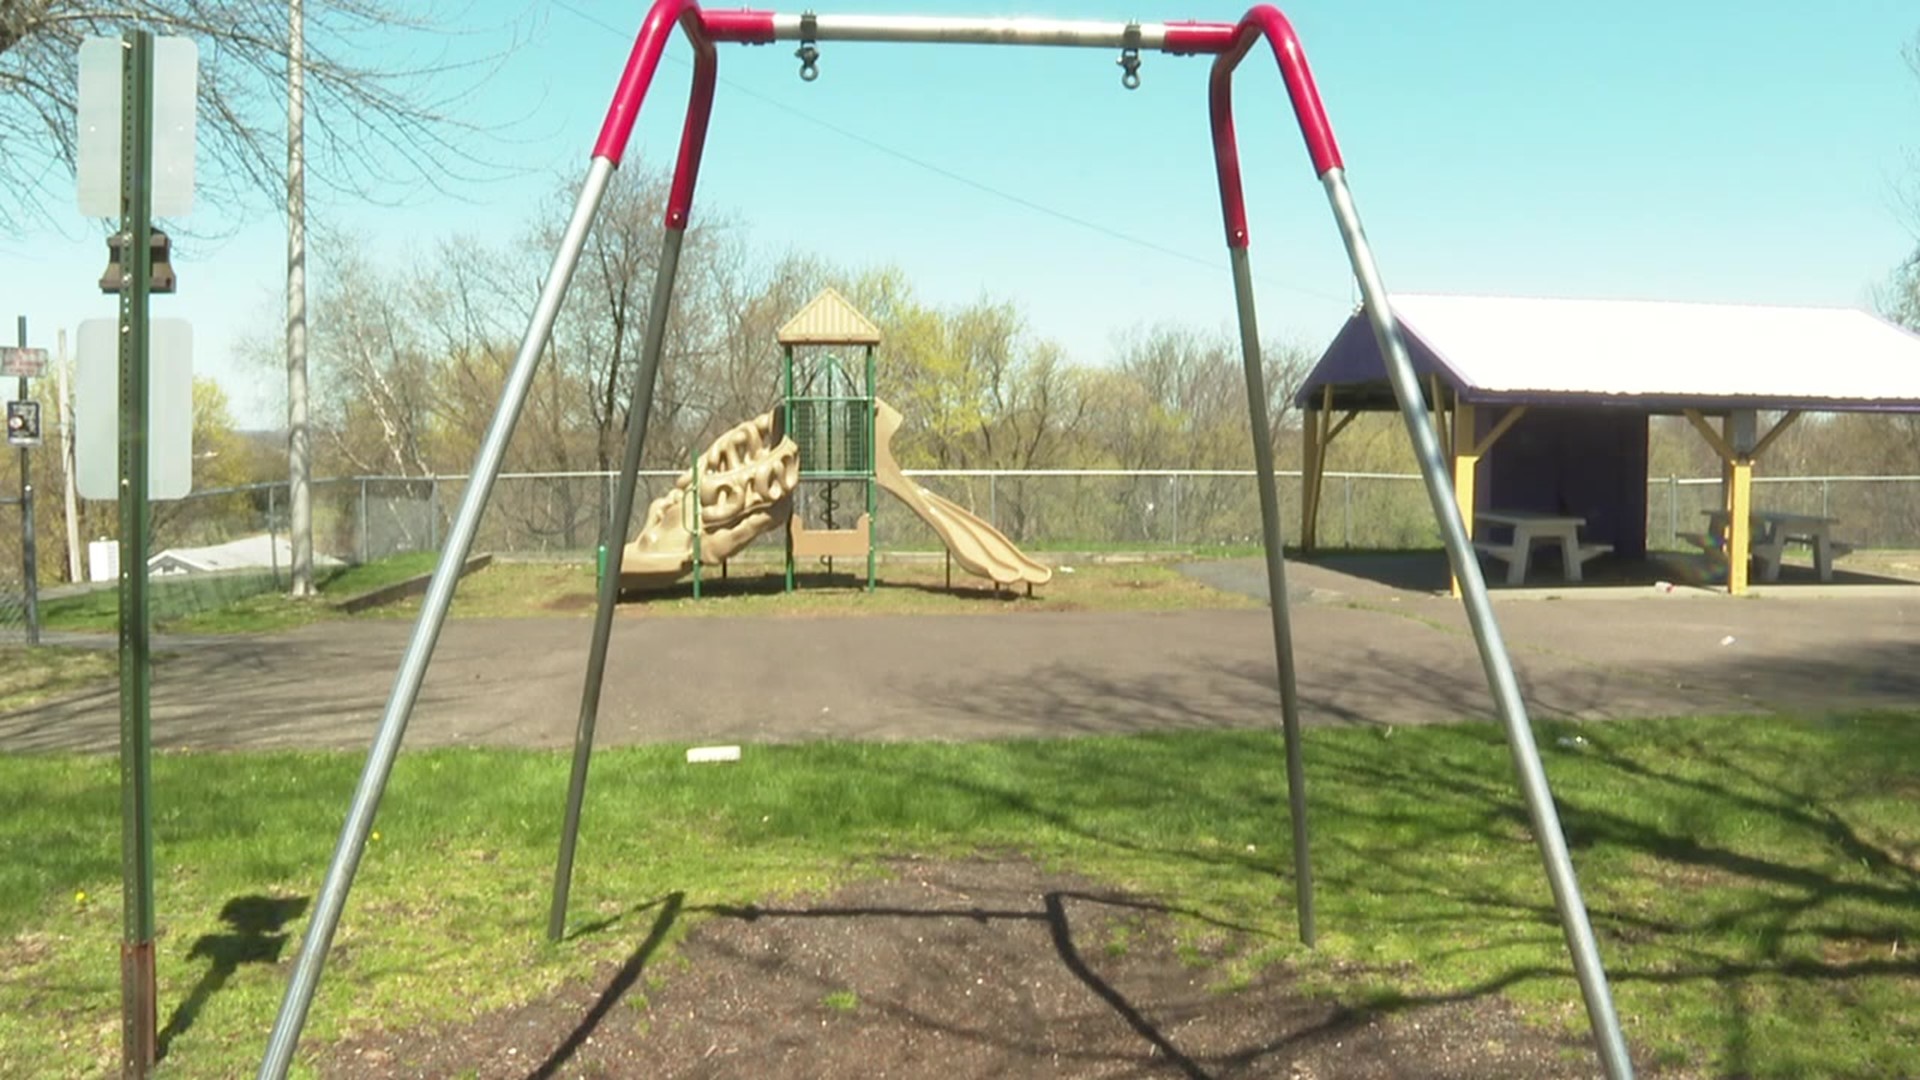 The handicap-accessible swing was taken out of service by a DPW worker after it was damaged.